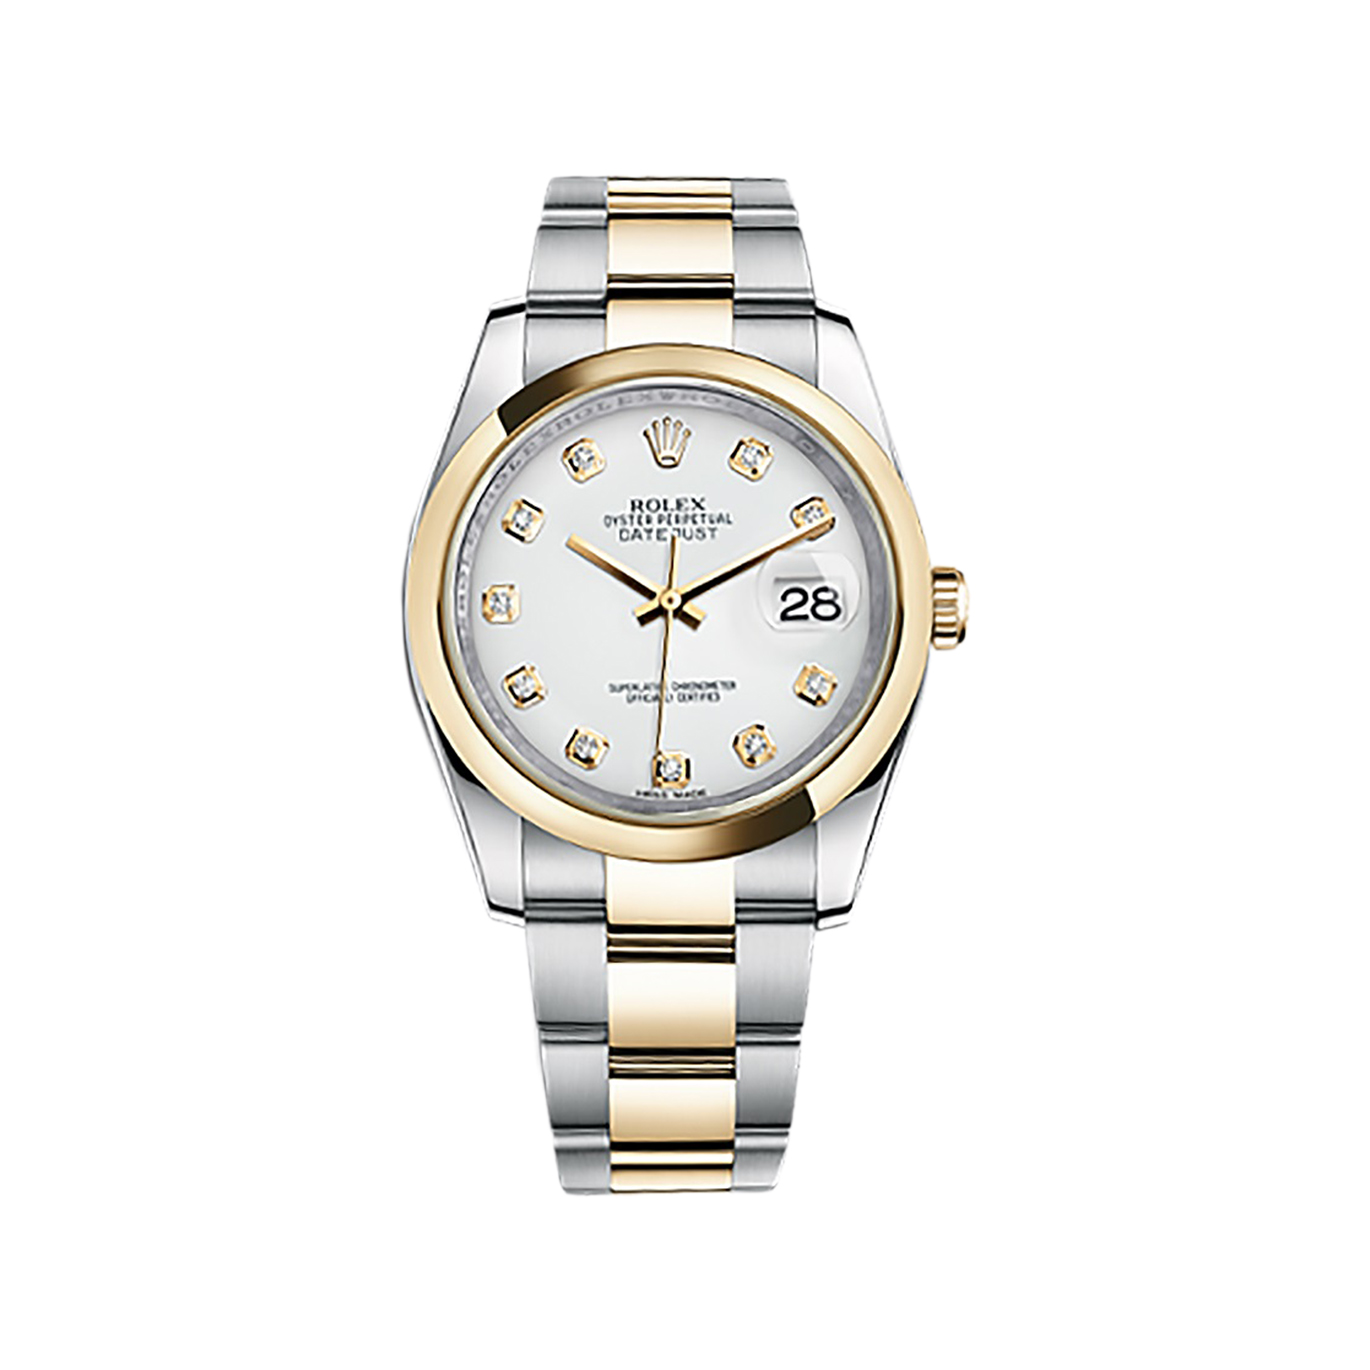 Datejust 36 116203 Gold & Stainless Steel Watch (White Set with Diamonds)